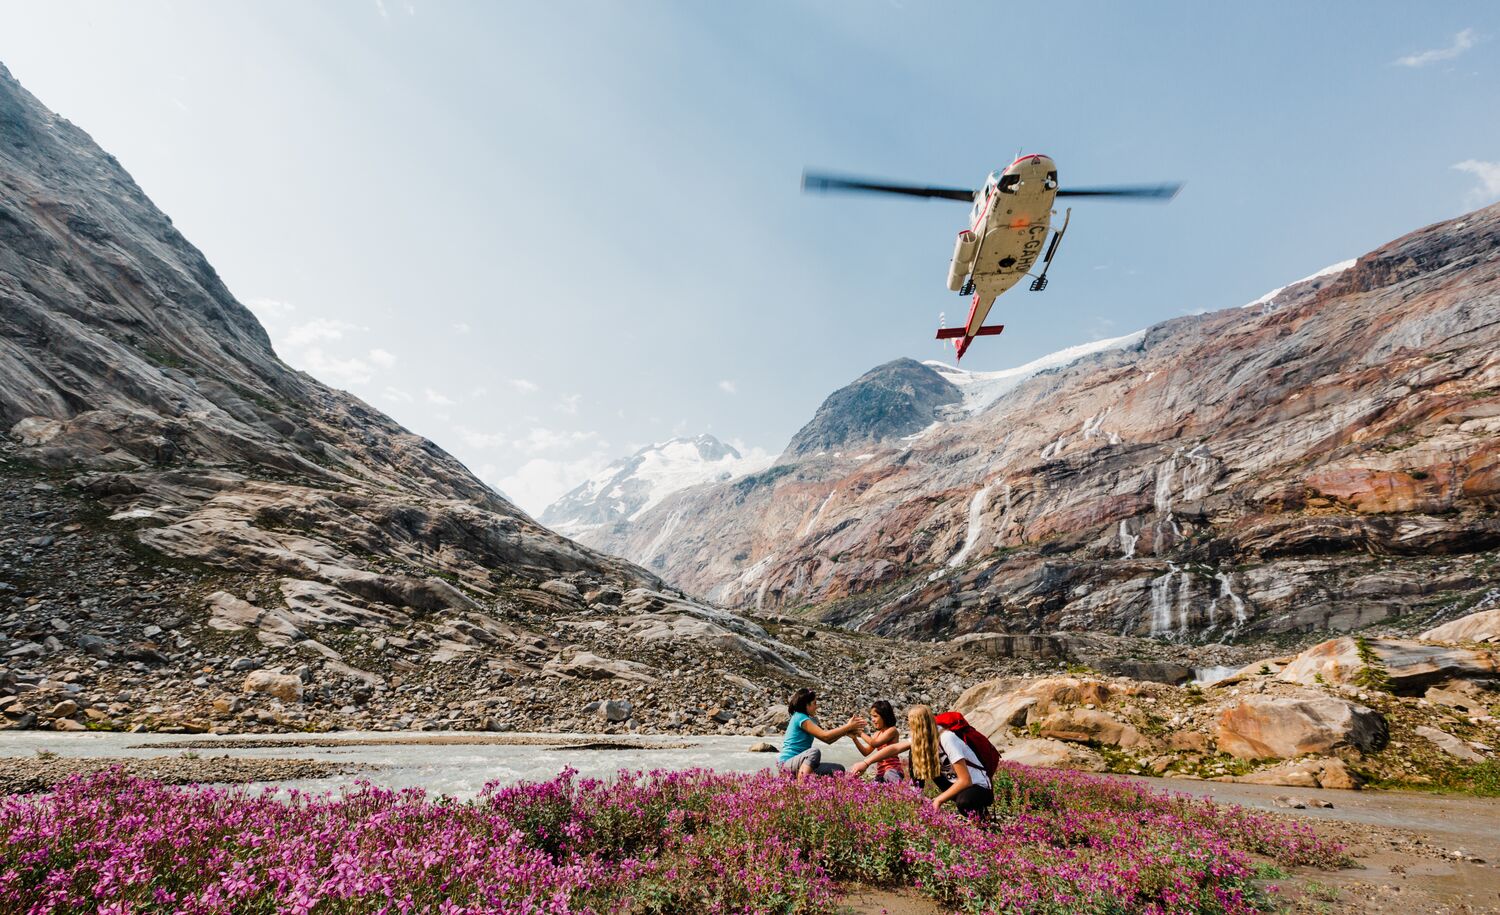 A helicopter flies over a group on a heli-hiking adventure with CMH in Banff National Park